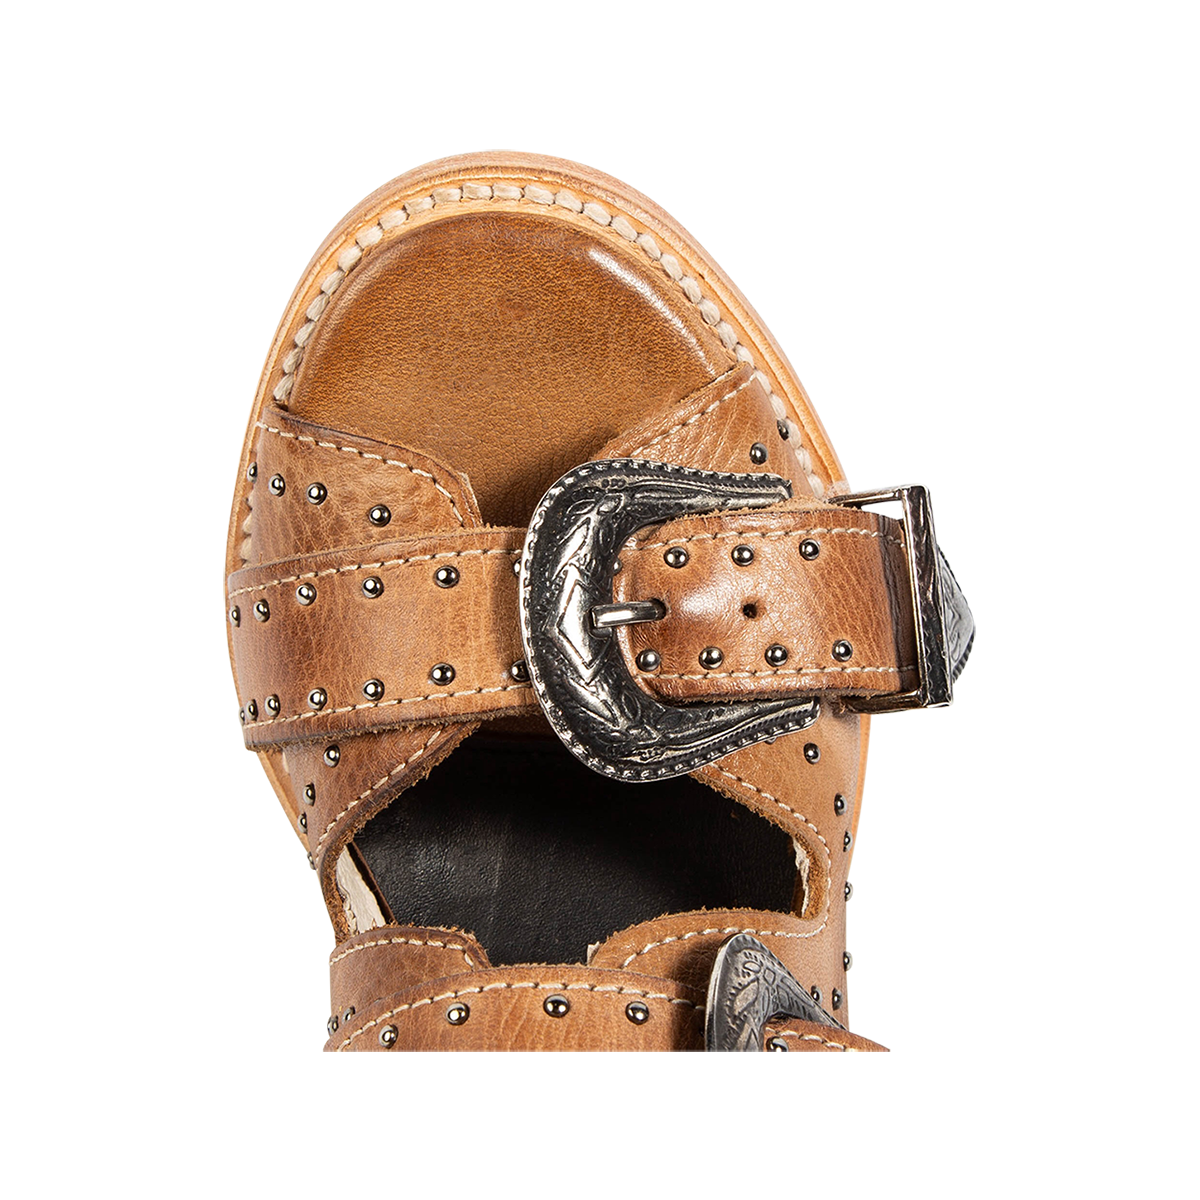 Top view showing a rounded toe and shaft buckles on FREEBIRD women's Violet wheat leather sandal